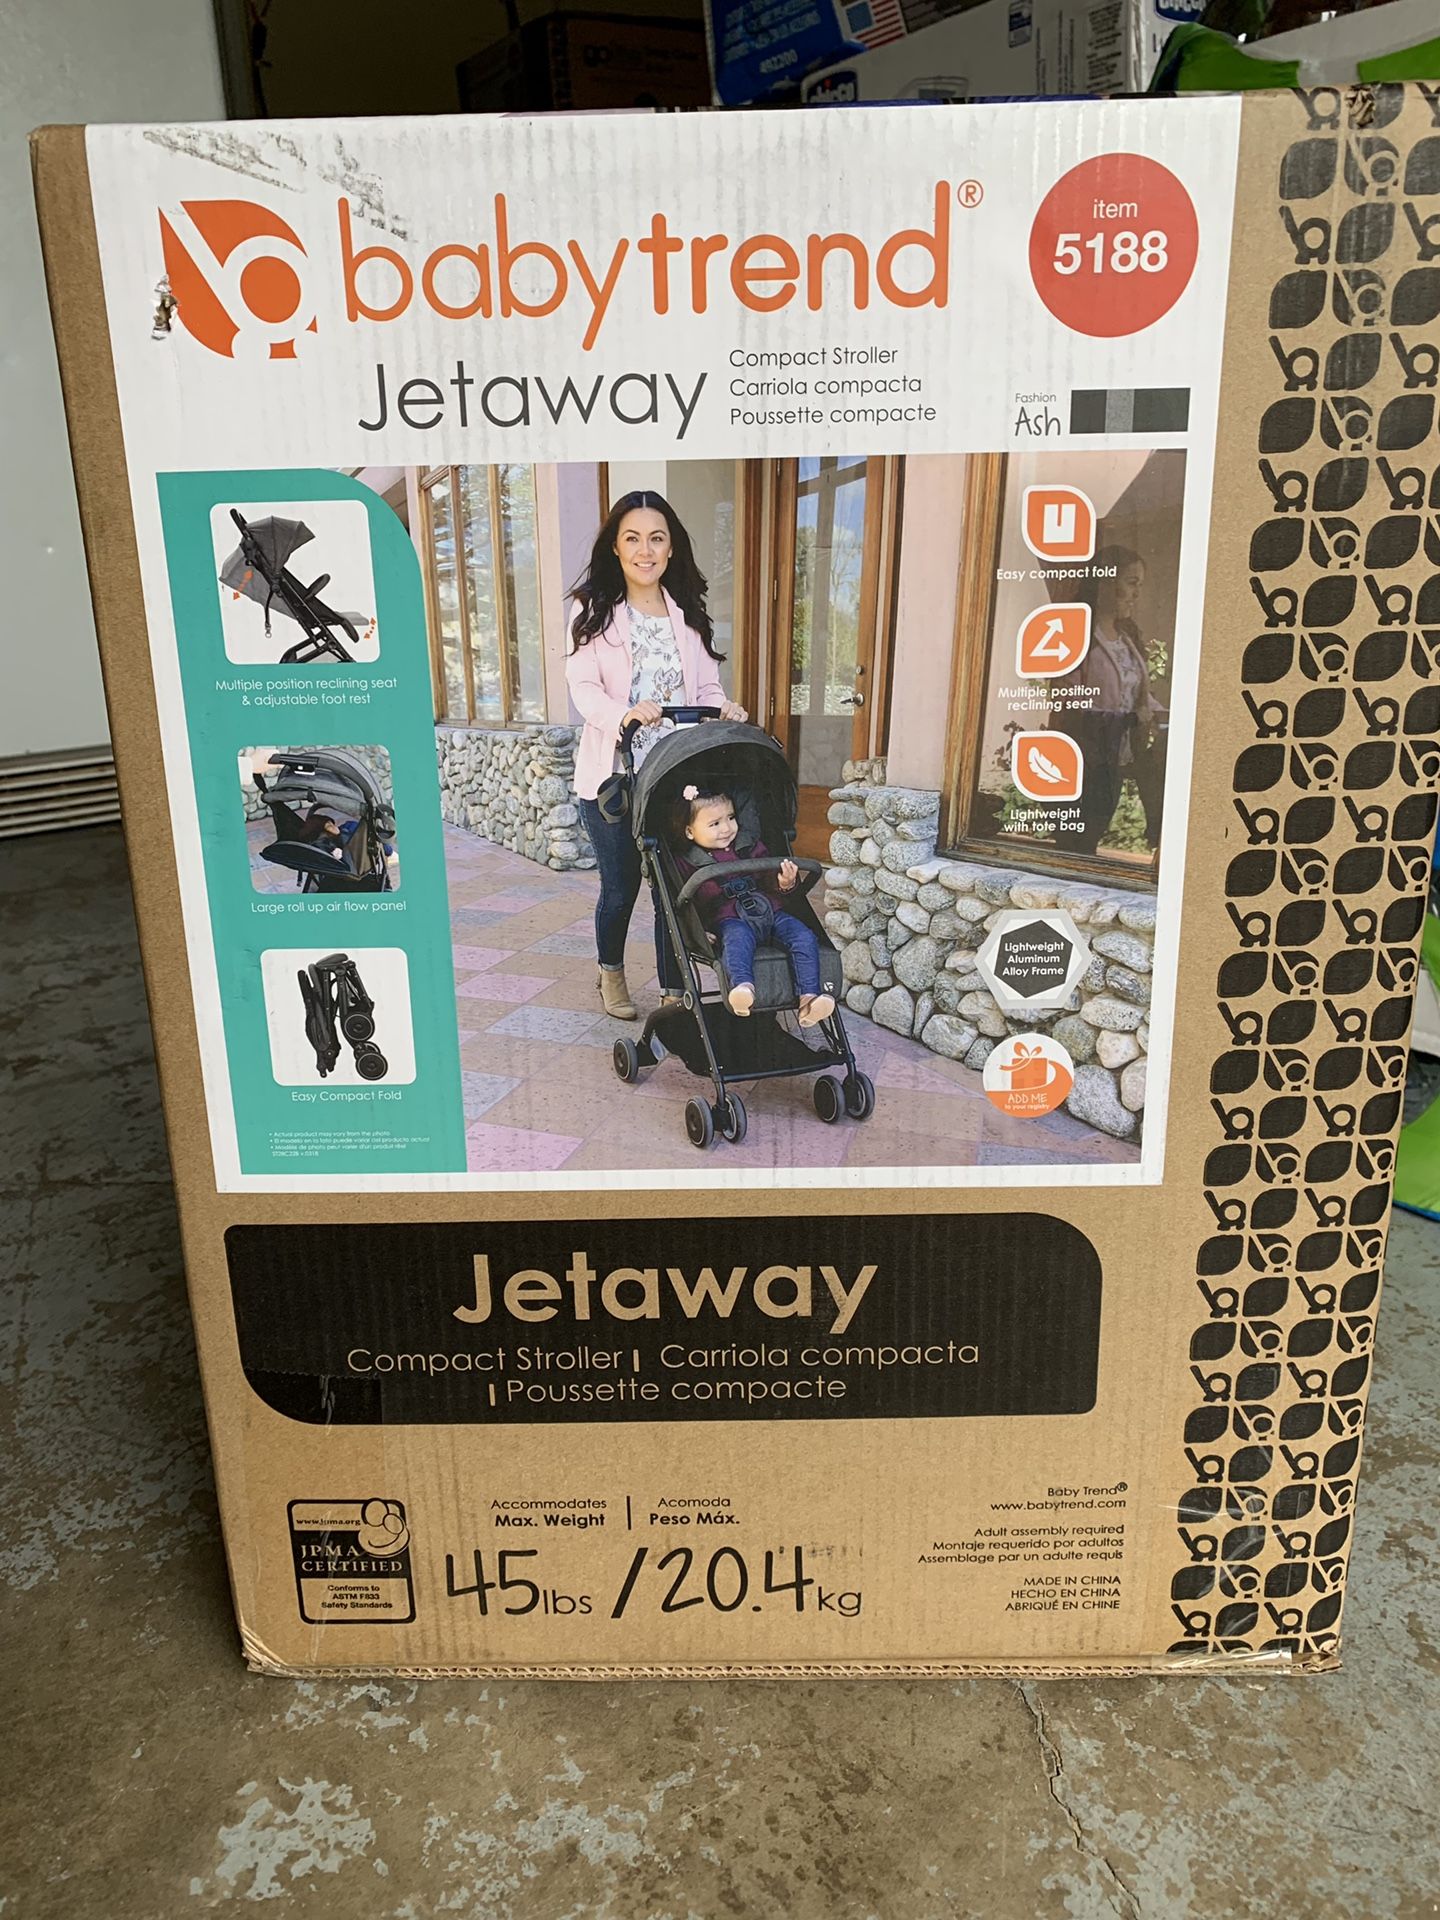 Baby trend/Jetaway/stroller/brand new never used comes with the original unopen box/retail is $149